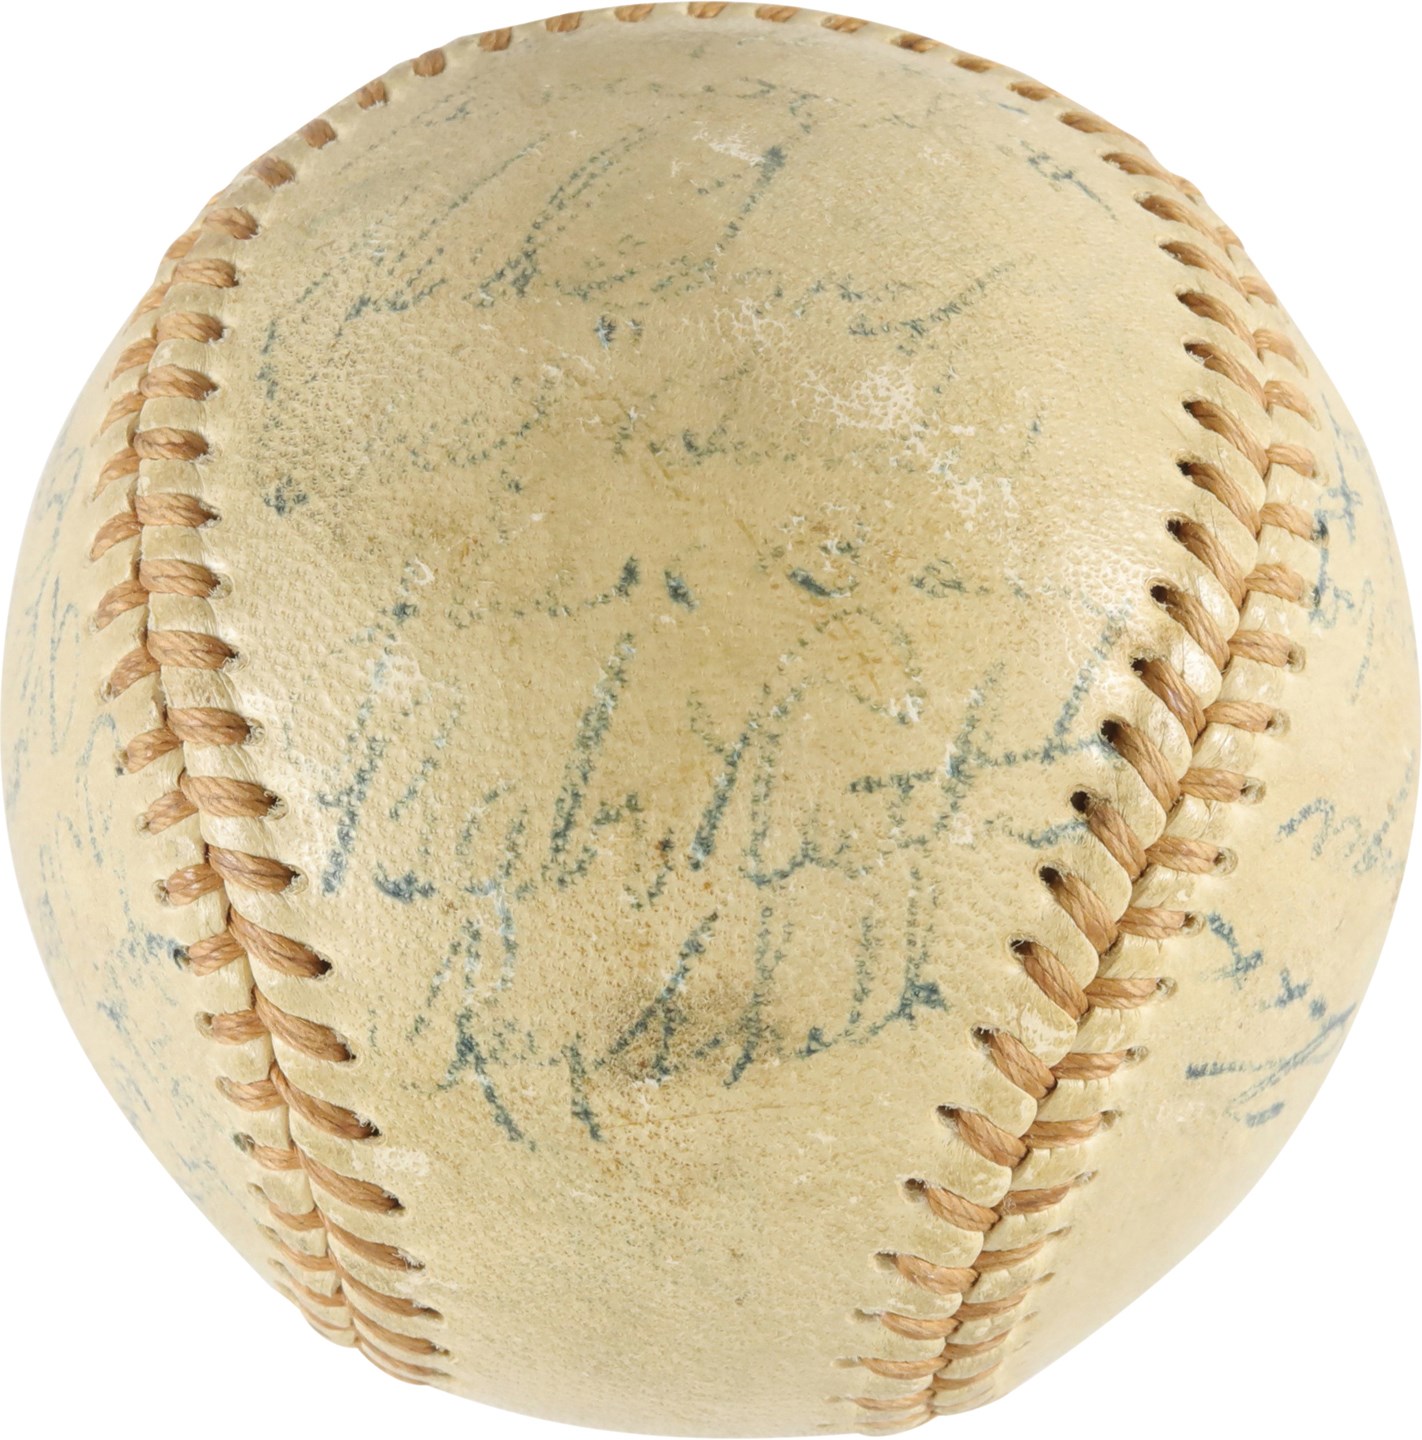 Baseball Autographs - Extraordinary 1947 New York Yankees Inaugural Old Timers Day Signed Baseball - 32 Signatures with 18 Hall of Famers including Ruth, Cobb, Foxx & Young (PSA)